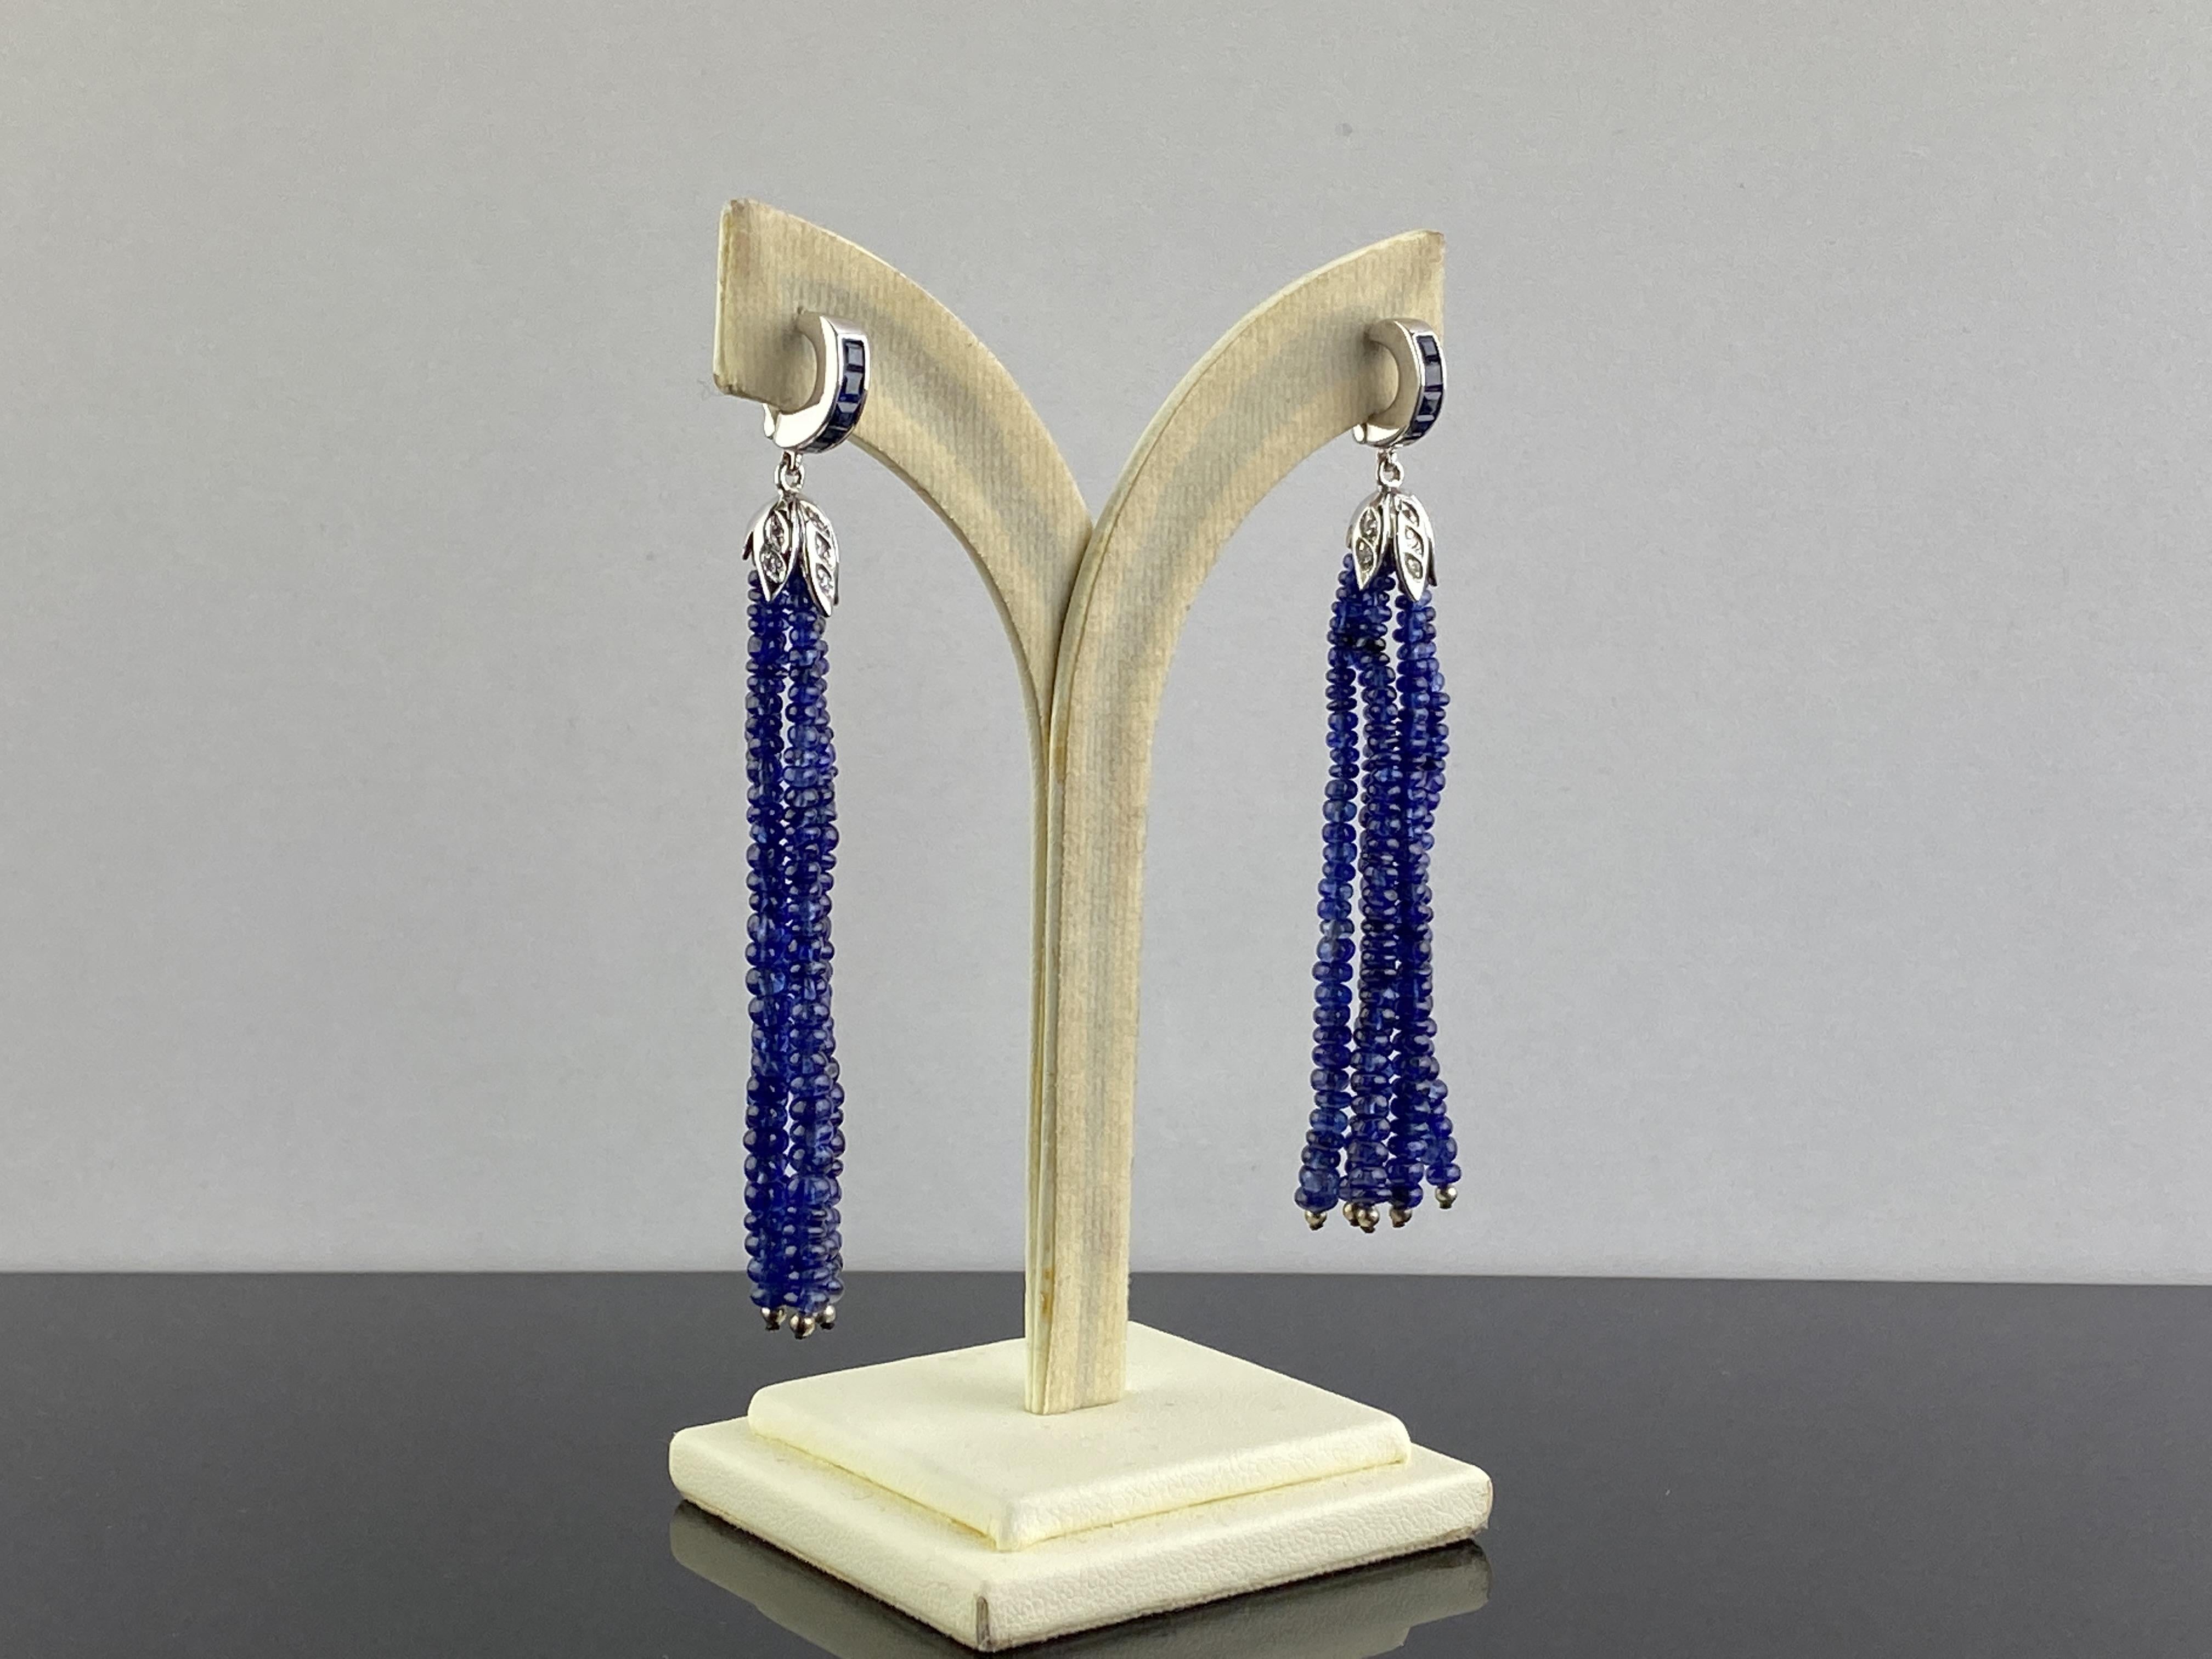 A beautiful pair of dangling earrings, with 68 carats Blue Sapphire beads earrings, set in 18K White Gold with Diamonds and Blue Sapphires. The earrings come with a push-pull backing, and are around 3 inches long. Please feel free to message fore